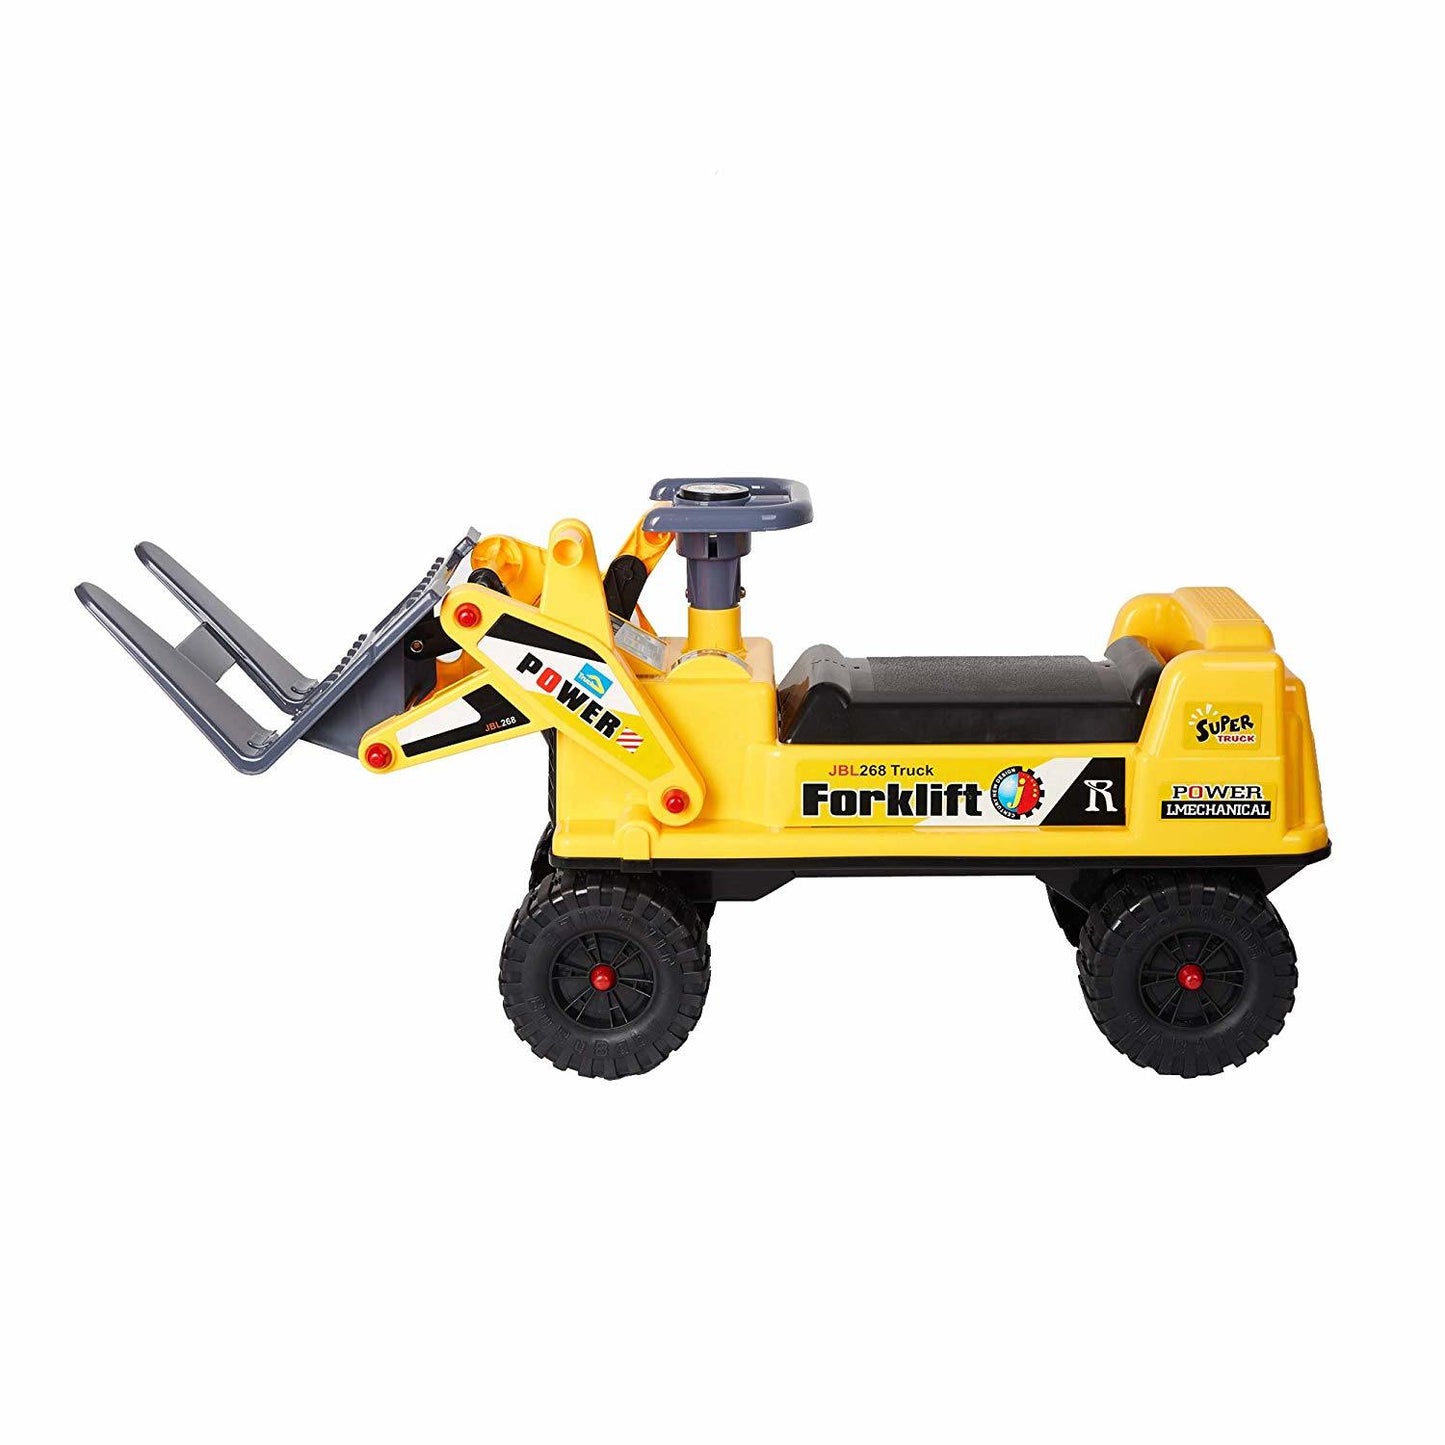 Ride-on Forklift Construction Truck Toy for Children